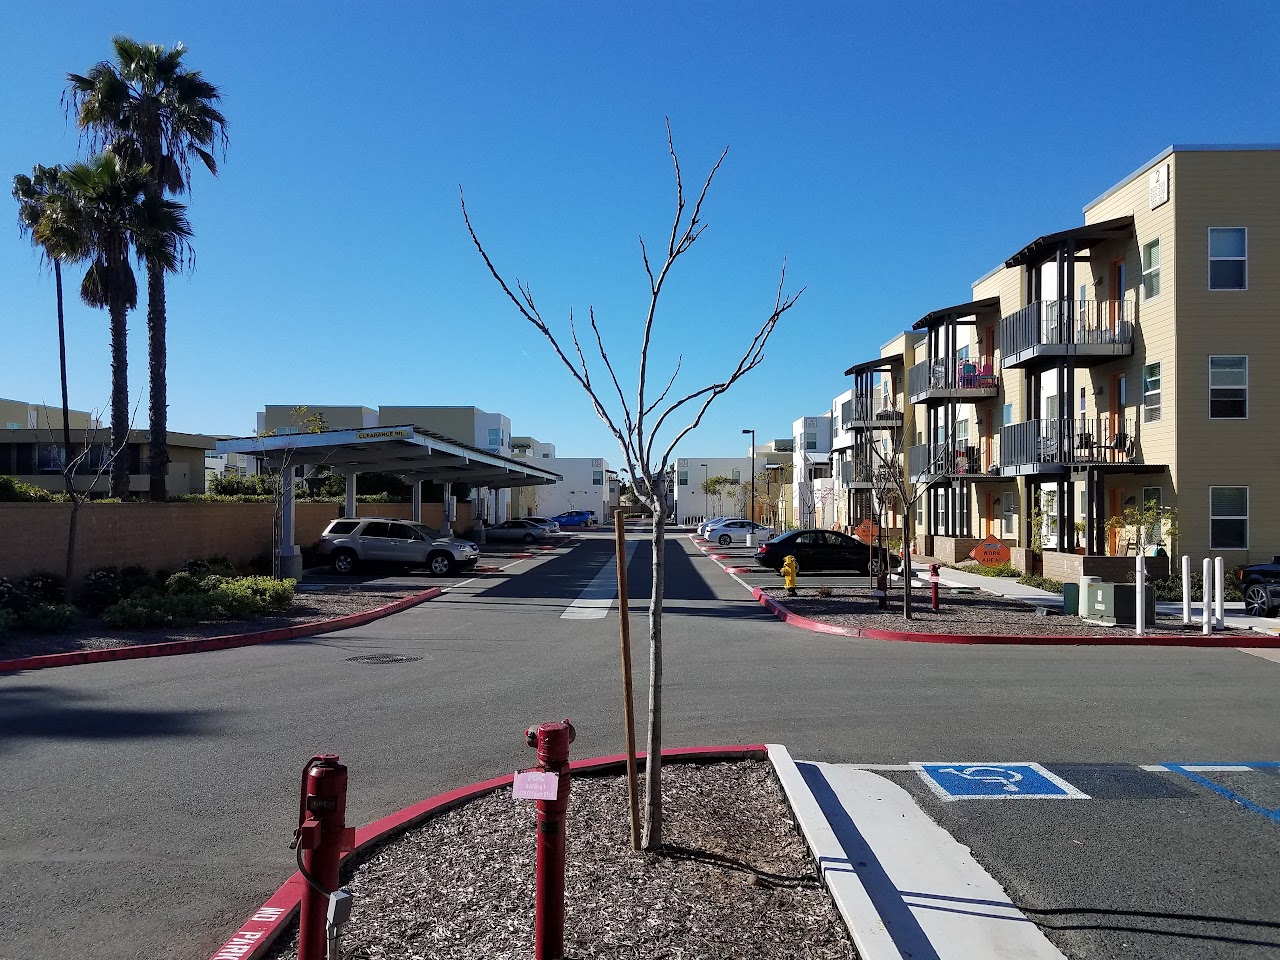 Photo of MESA COMMONS APARTMENTS. Affordable housing located at 6470 EL CAJON BLVD. SAN DIEGO, CA 92115